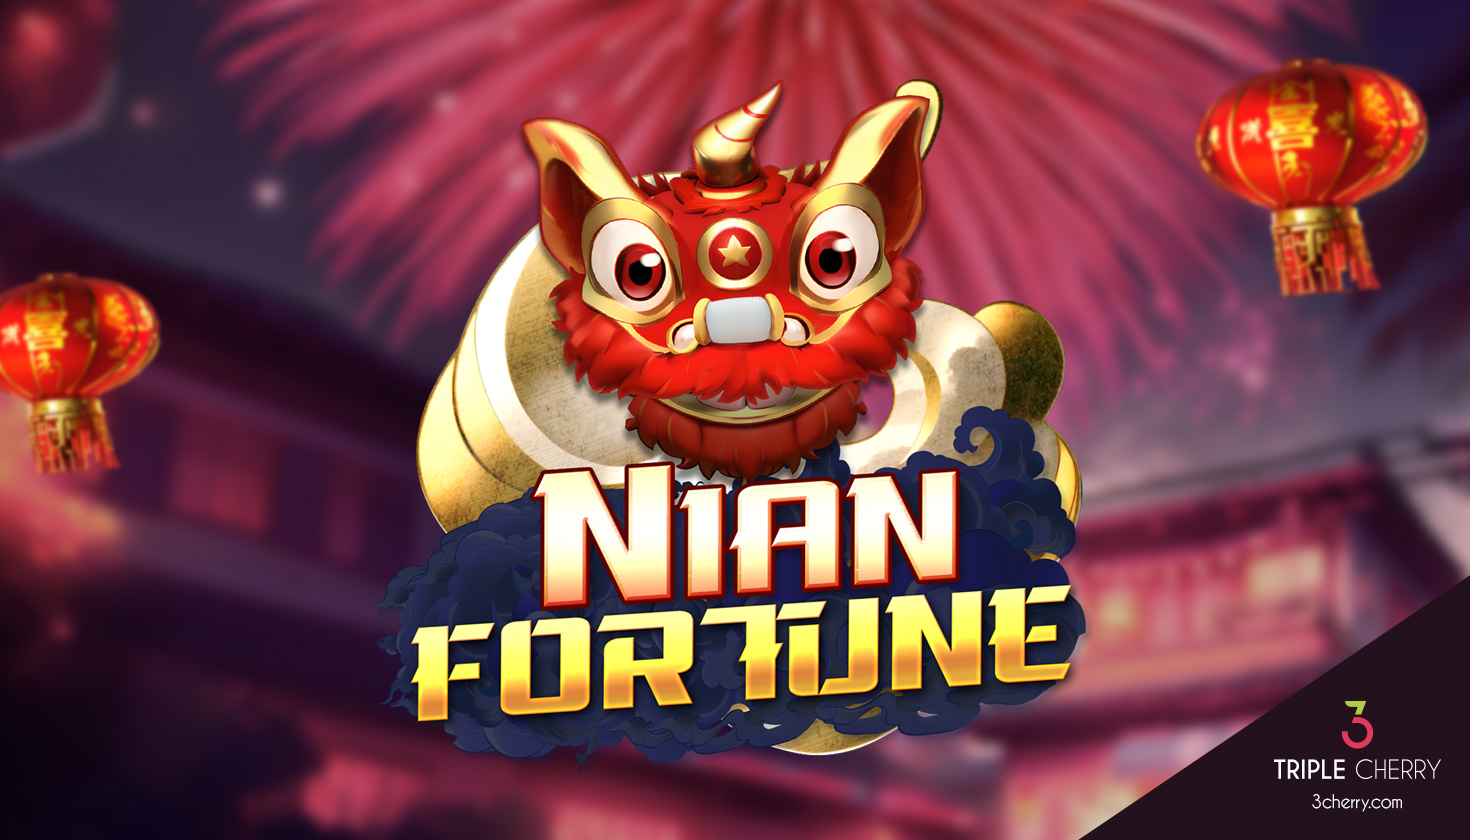 Nian Fortune by Triple Cherry